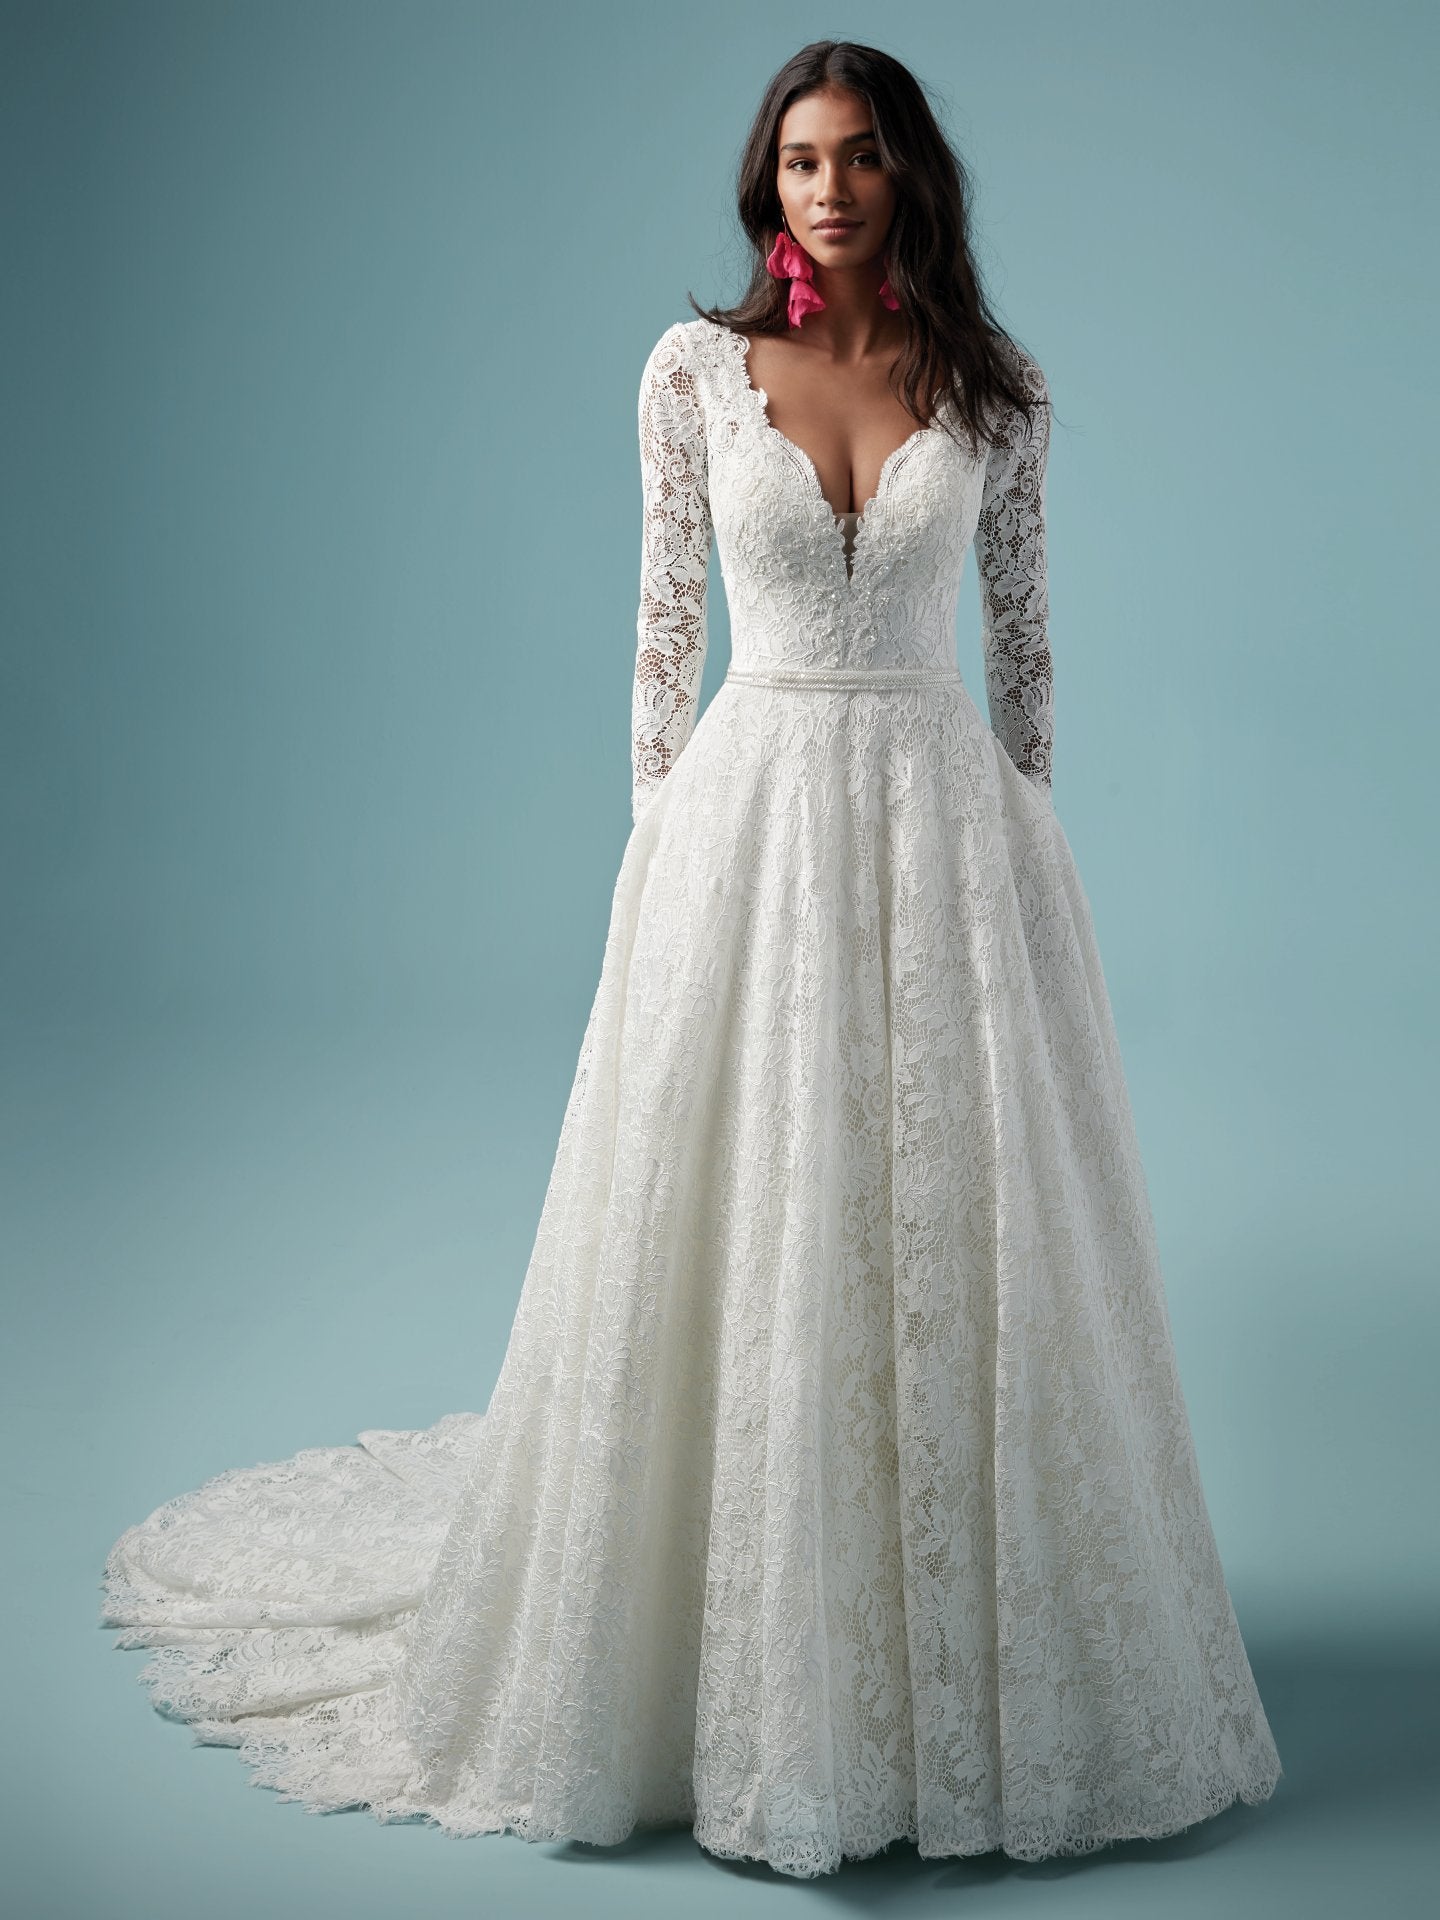 Lace V-neckline Long Sleeve Ball Gown Wedding Dress ...